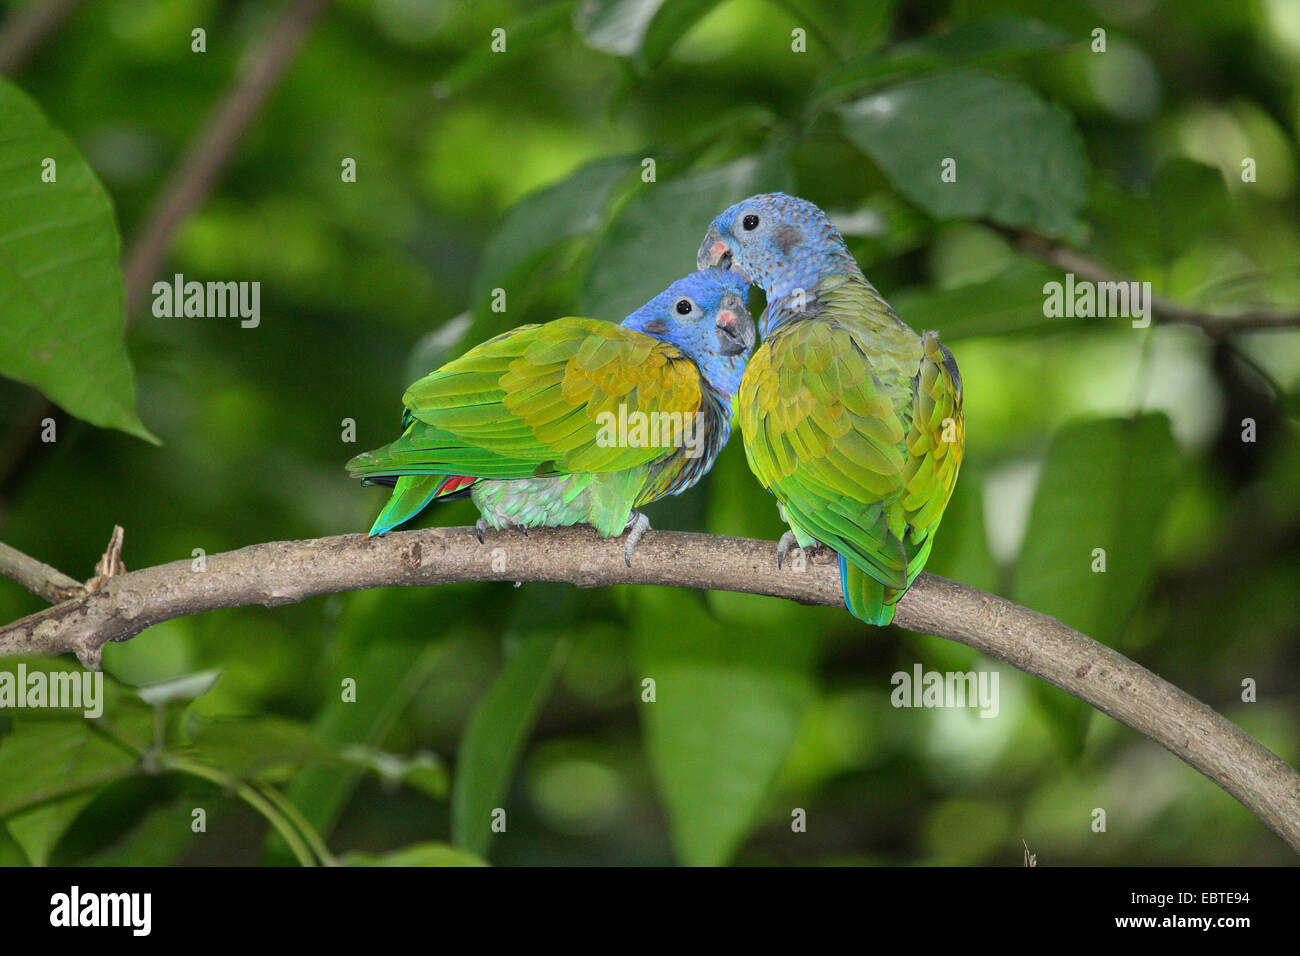 blue-headed parrot (Pionus menstruus), two blue-headed parrots sitting on a branch and grooming, Costa Rica Stock Photo